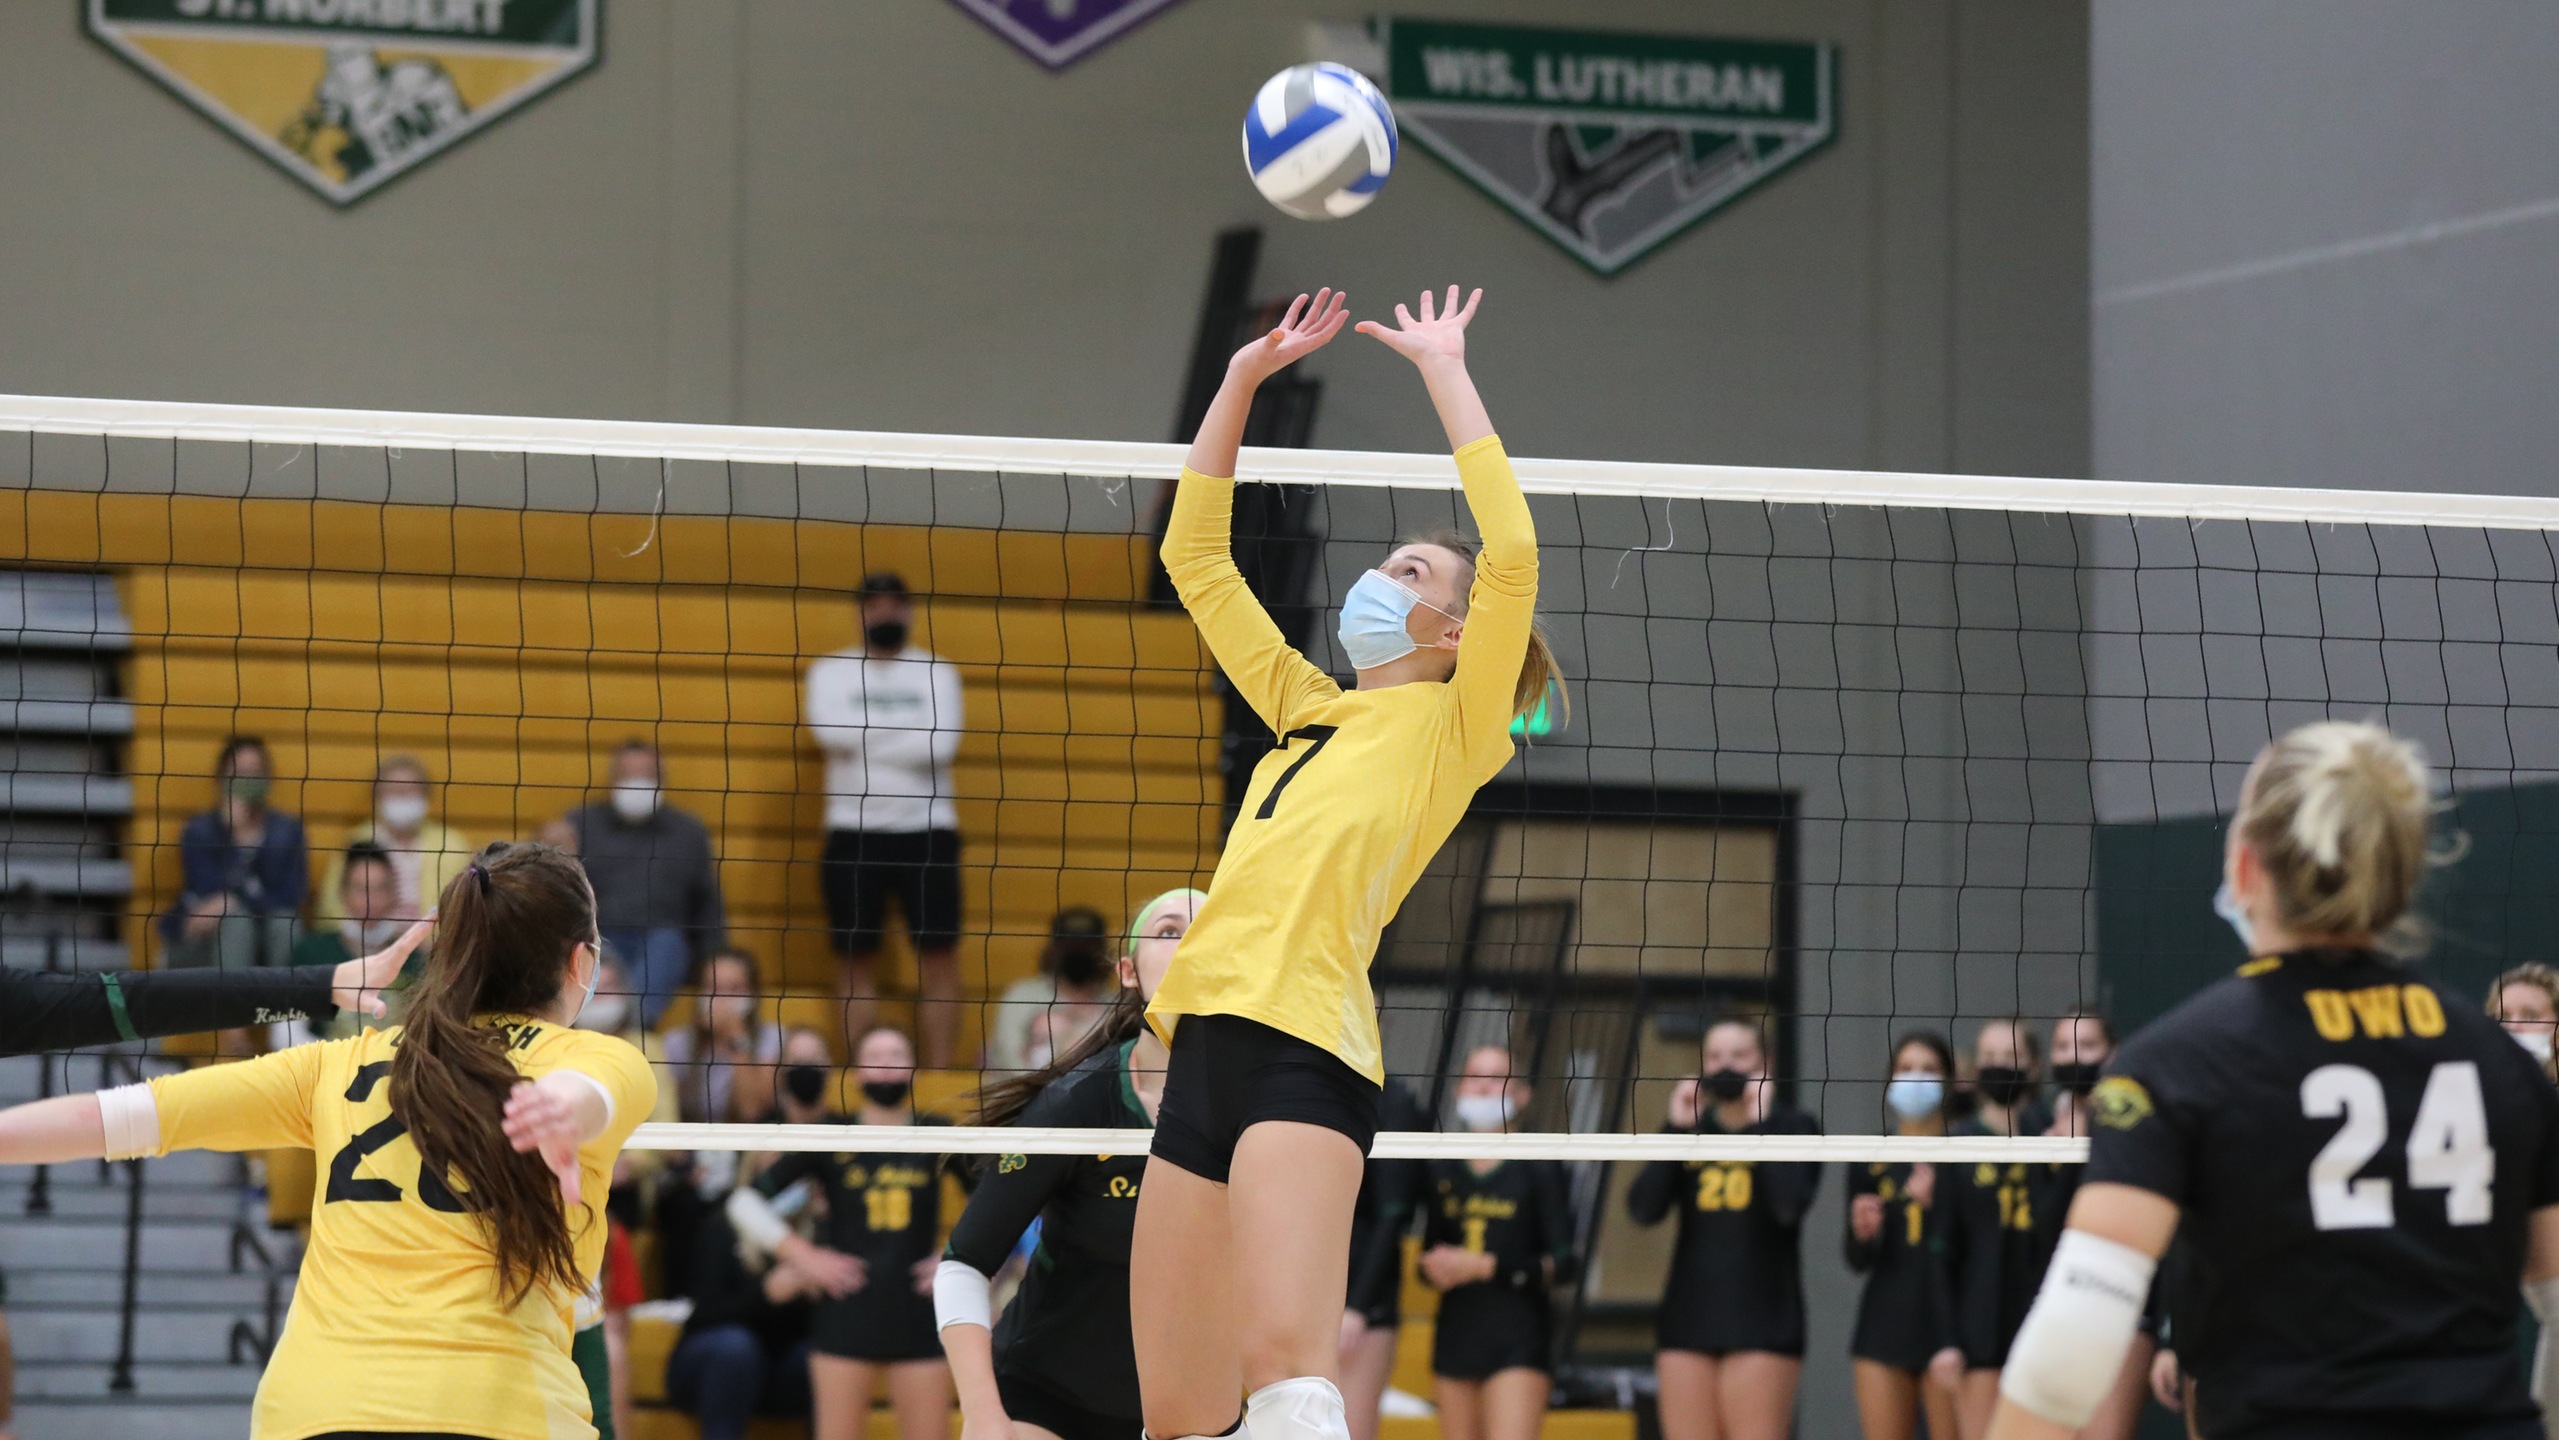 Kalli Mau totaled 35 assists and 22 digs to help UW-Oshkosh defeat both the Green Knights and Muskies.